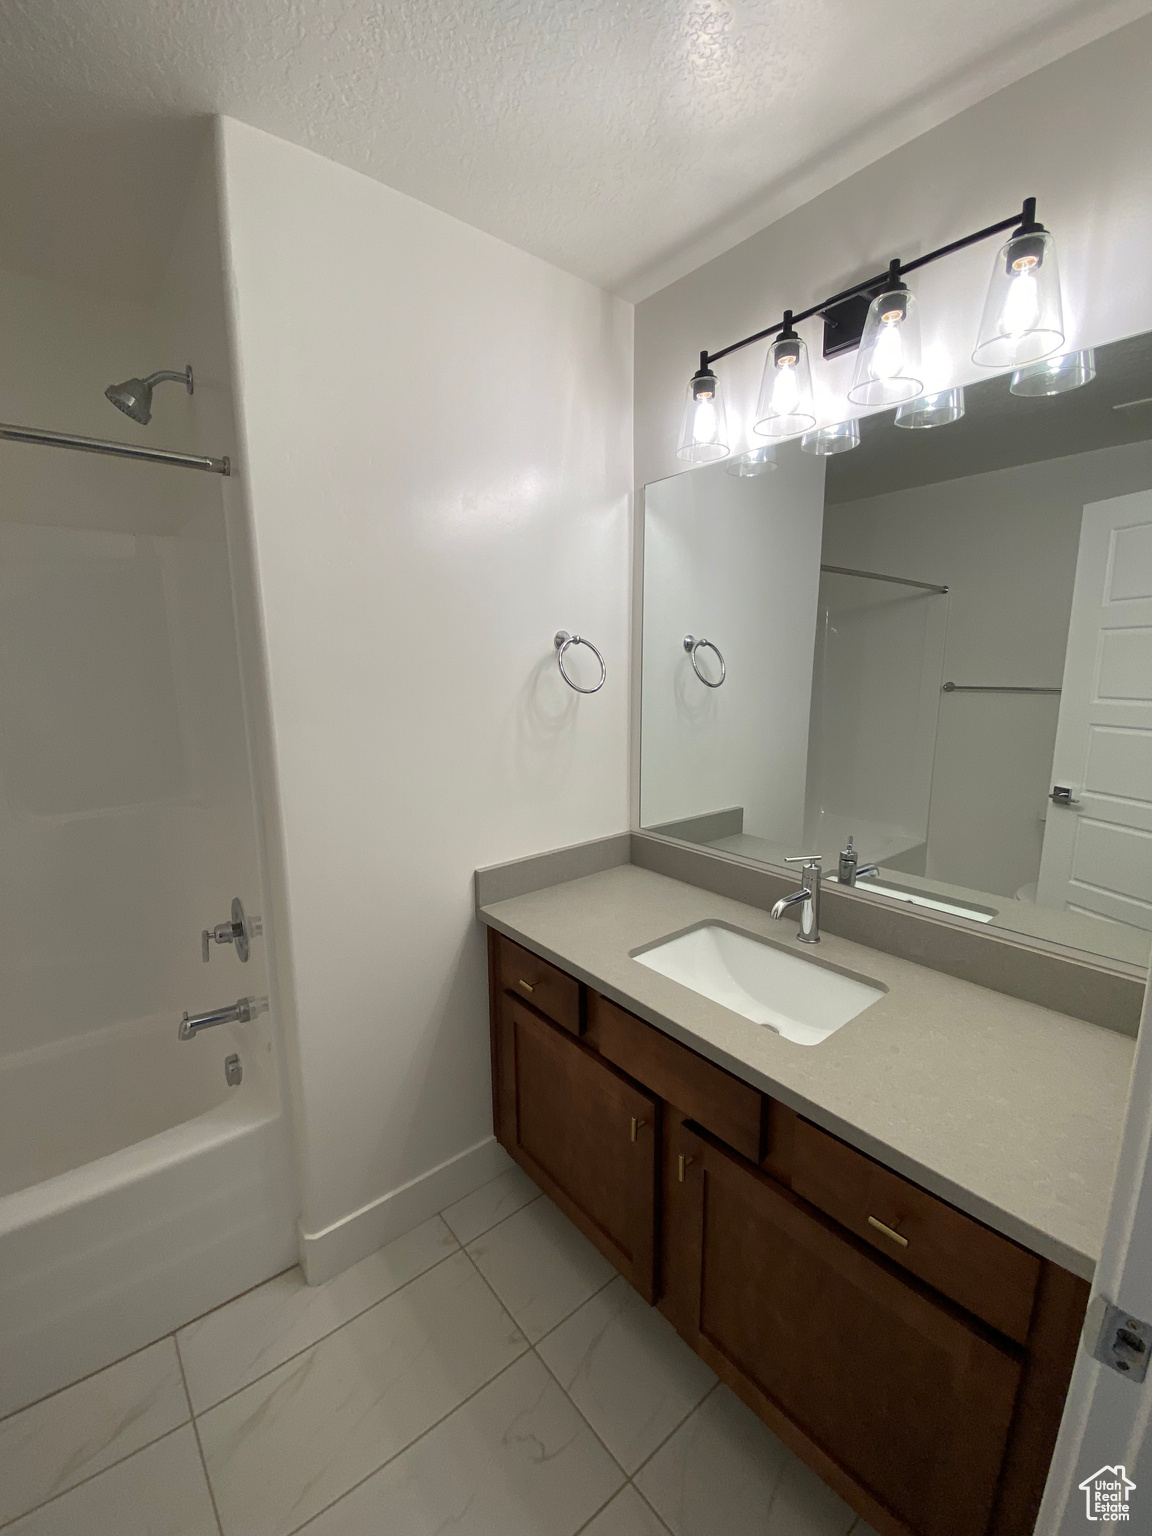 Bathroom with washtub / shower combination, vanity, tile floors, and a textured ceiling